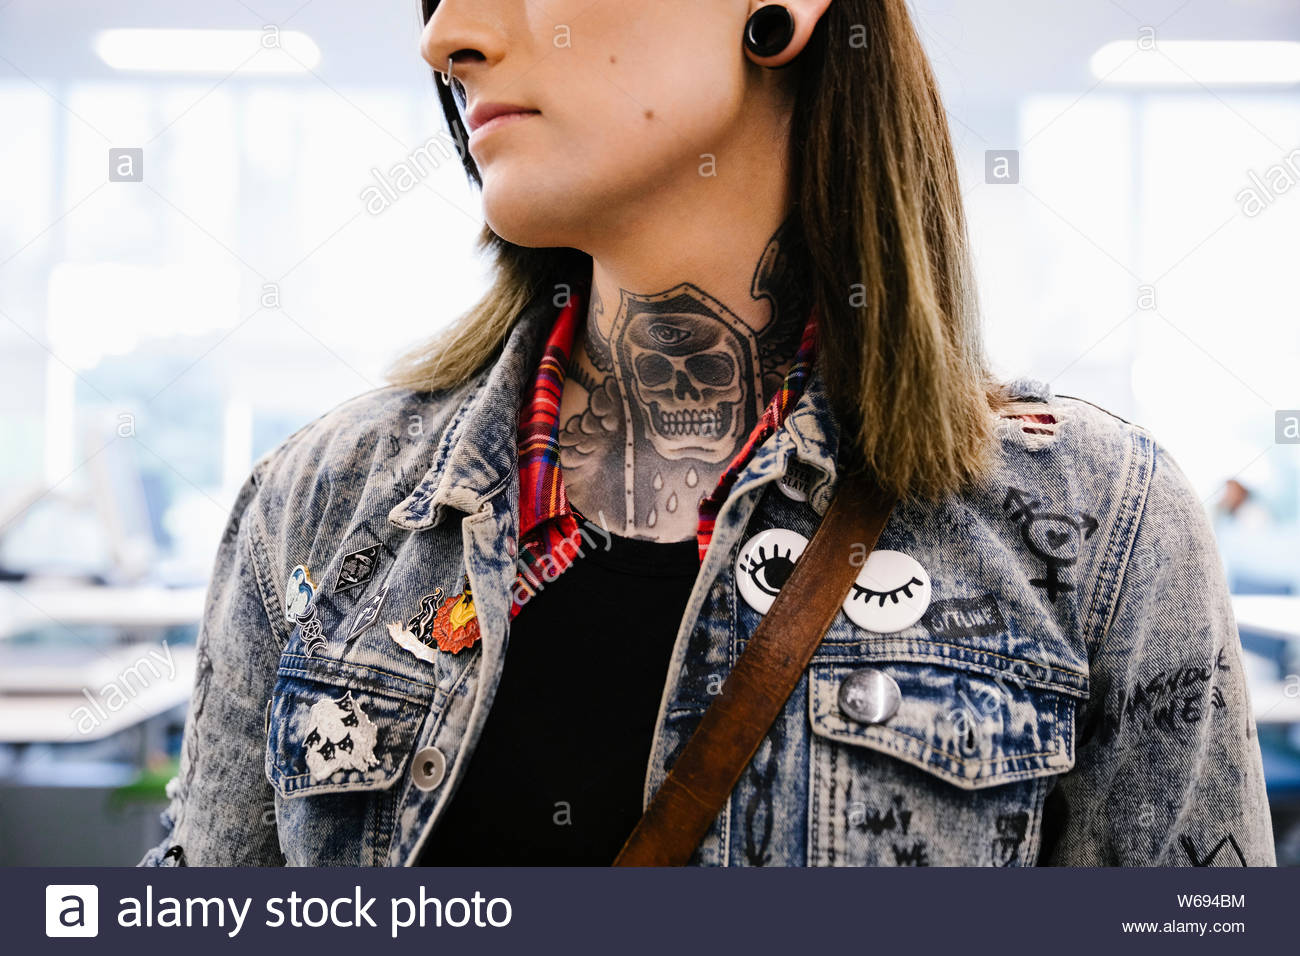 Student with tattoos on neck wearing denim jacket Stock Photo